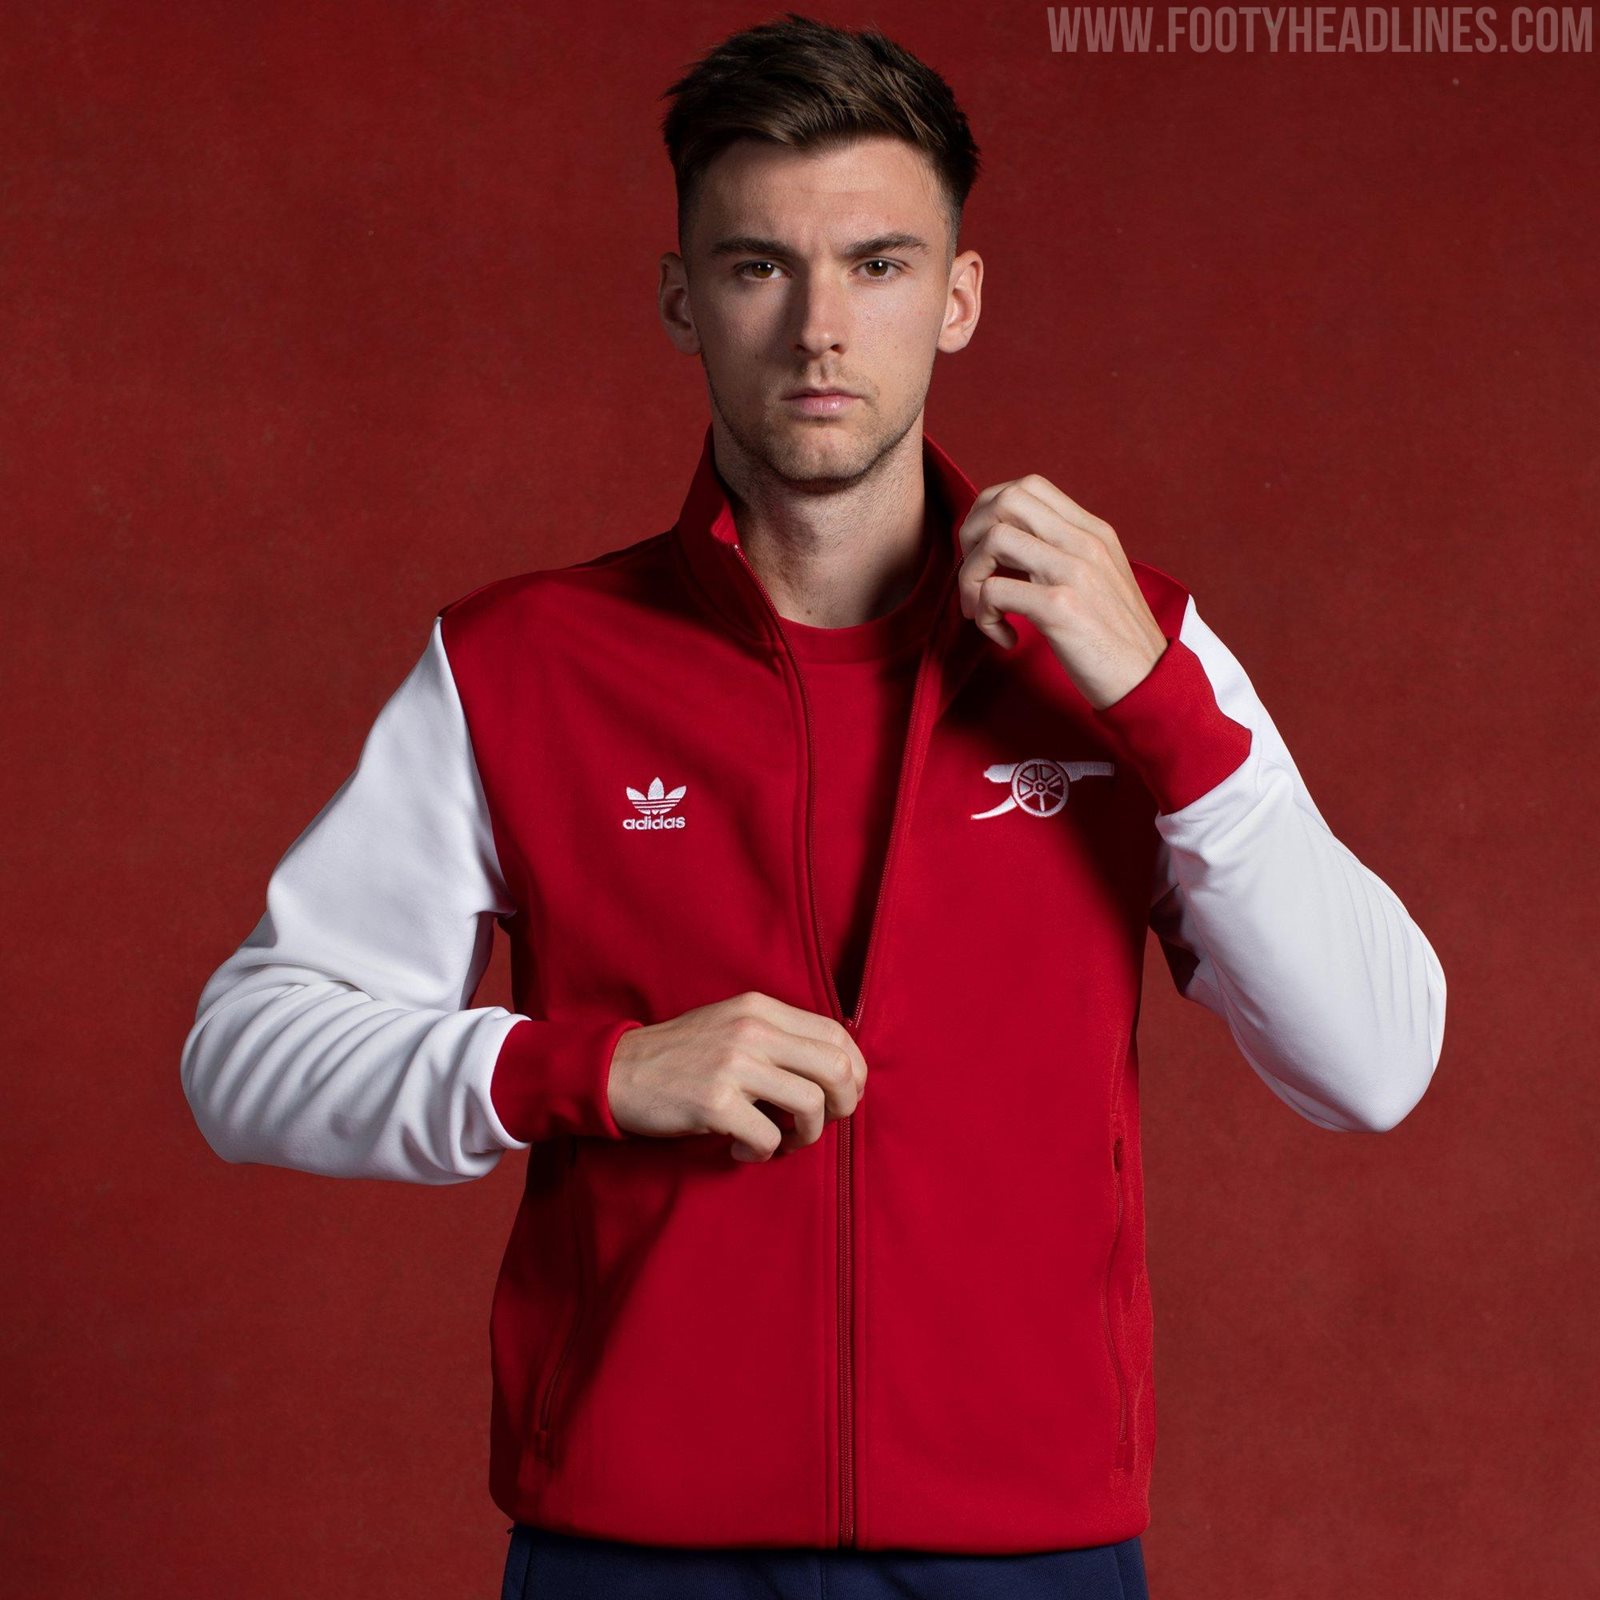 The retro collection of Arsenal by adidas